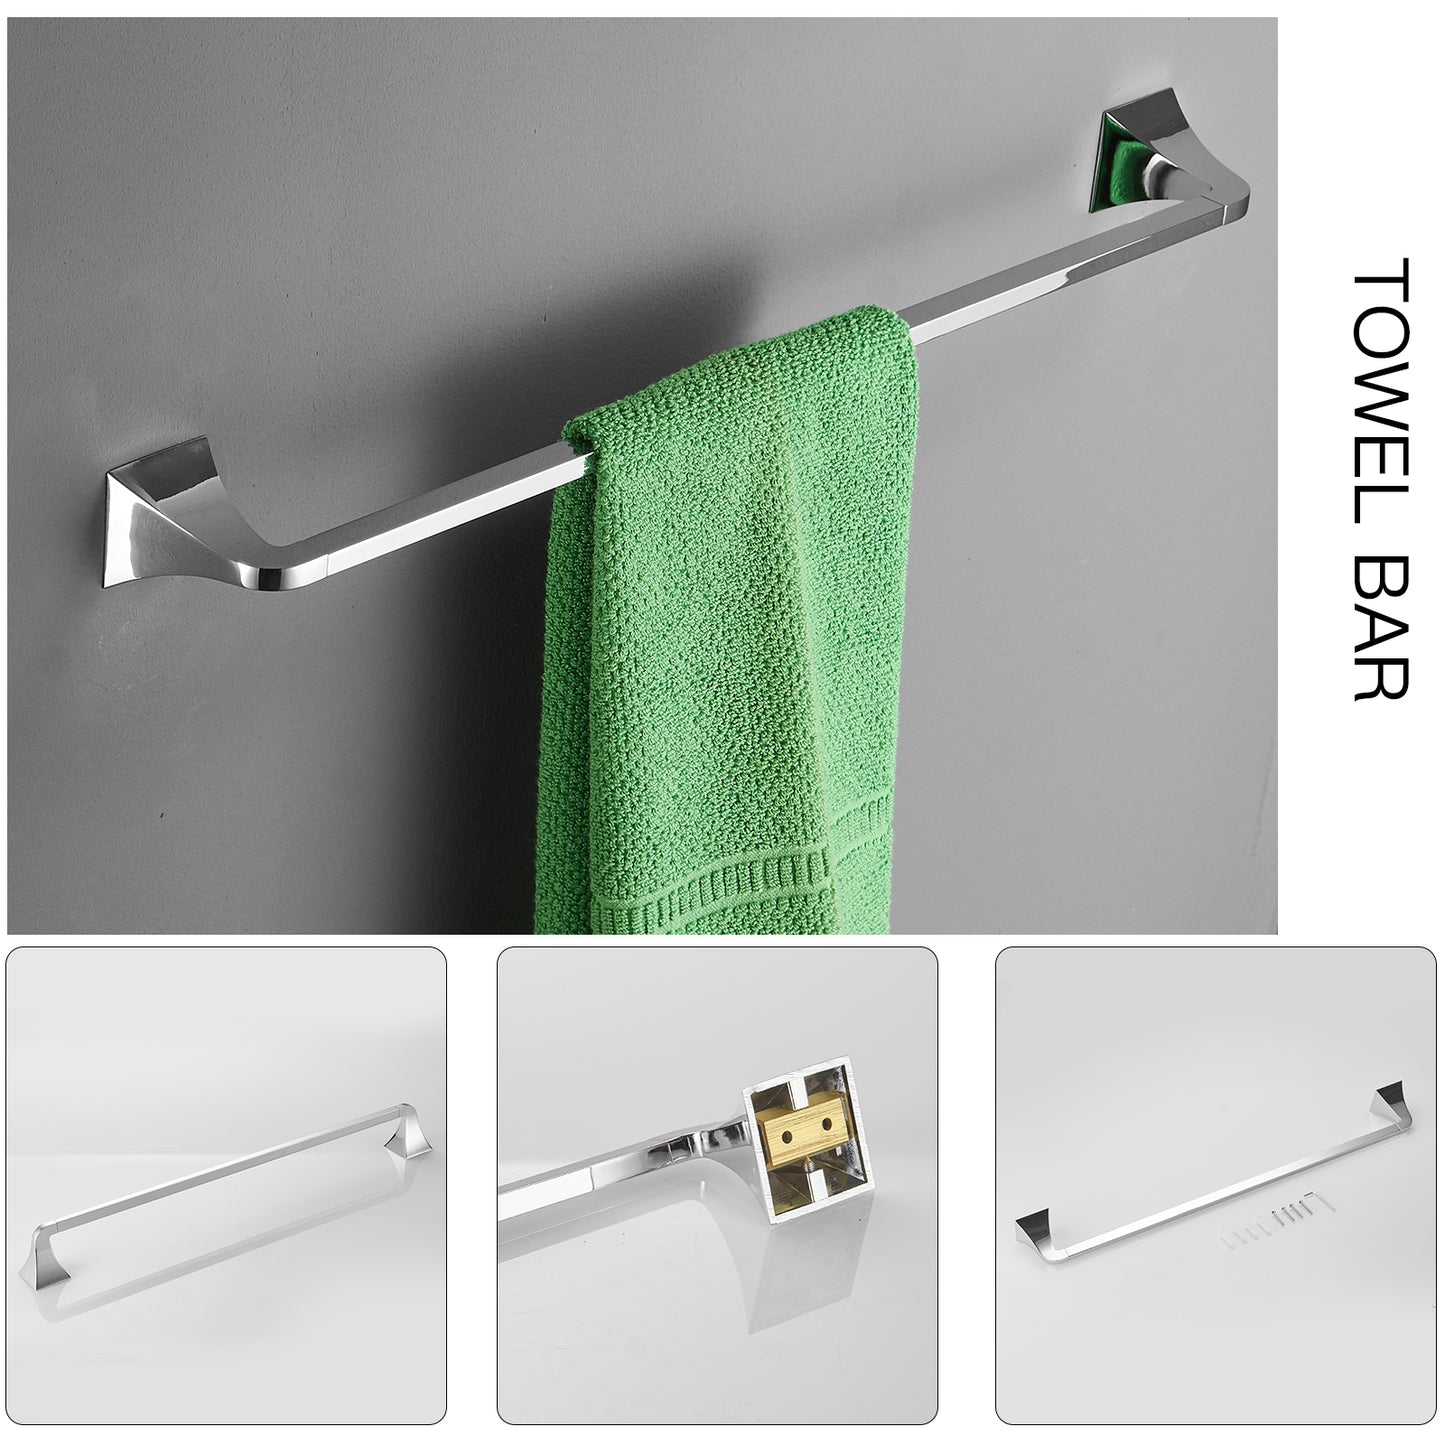 4-Piece Bath Hardware Set with Towel Ring Toilet Paper Holder Towel Hook and 24 in. Towel Bar in Polished Chrome Bathroom Accessories